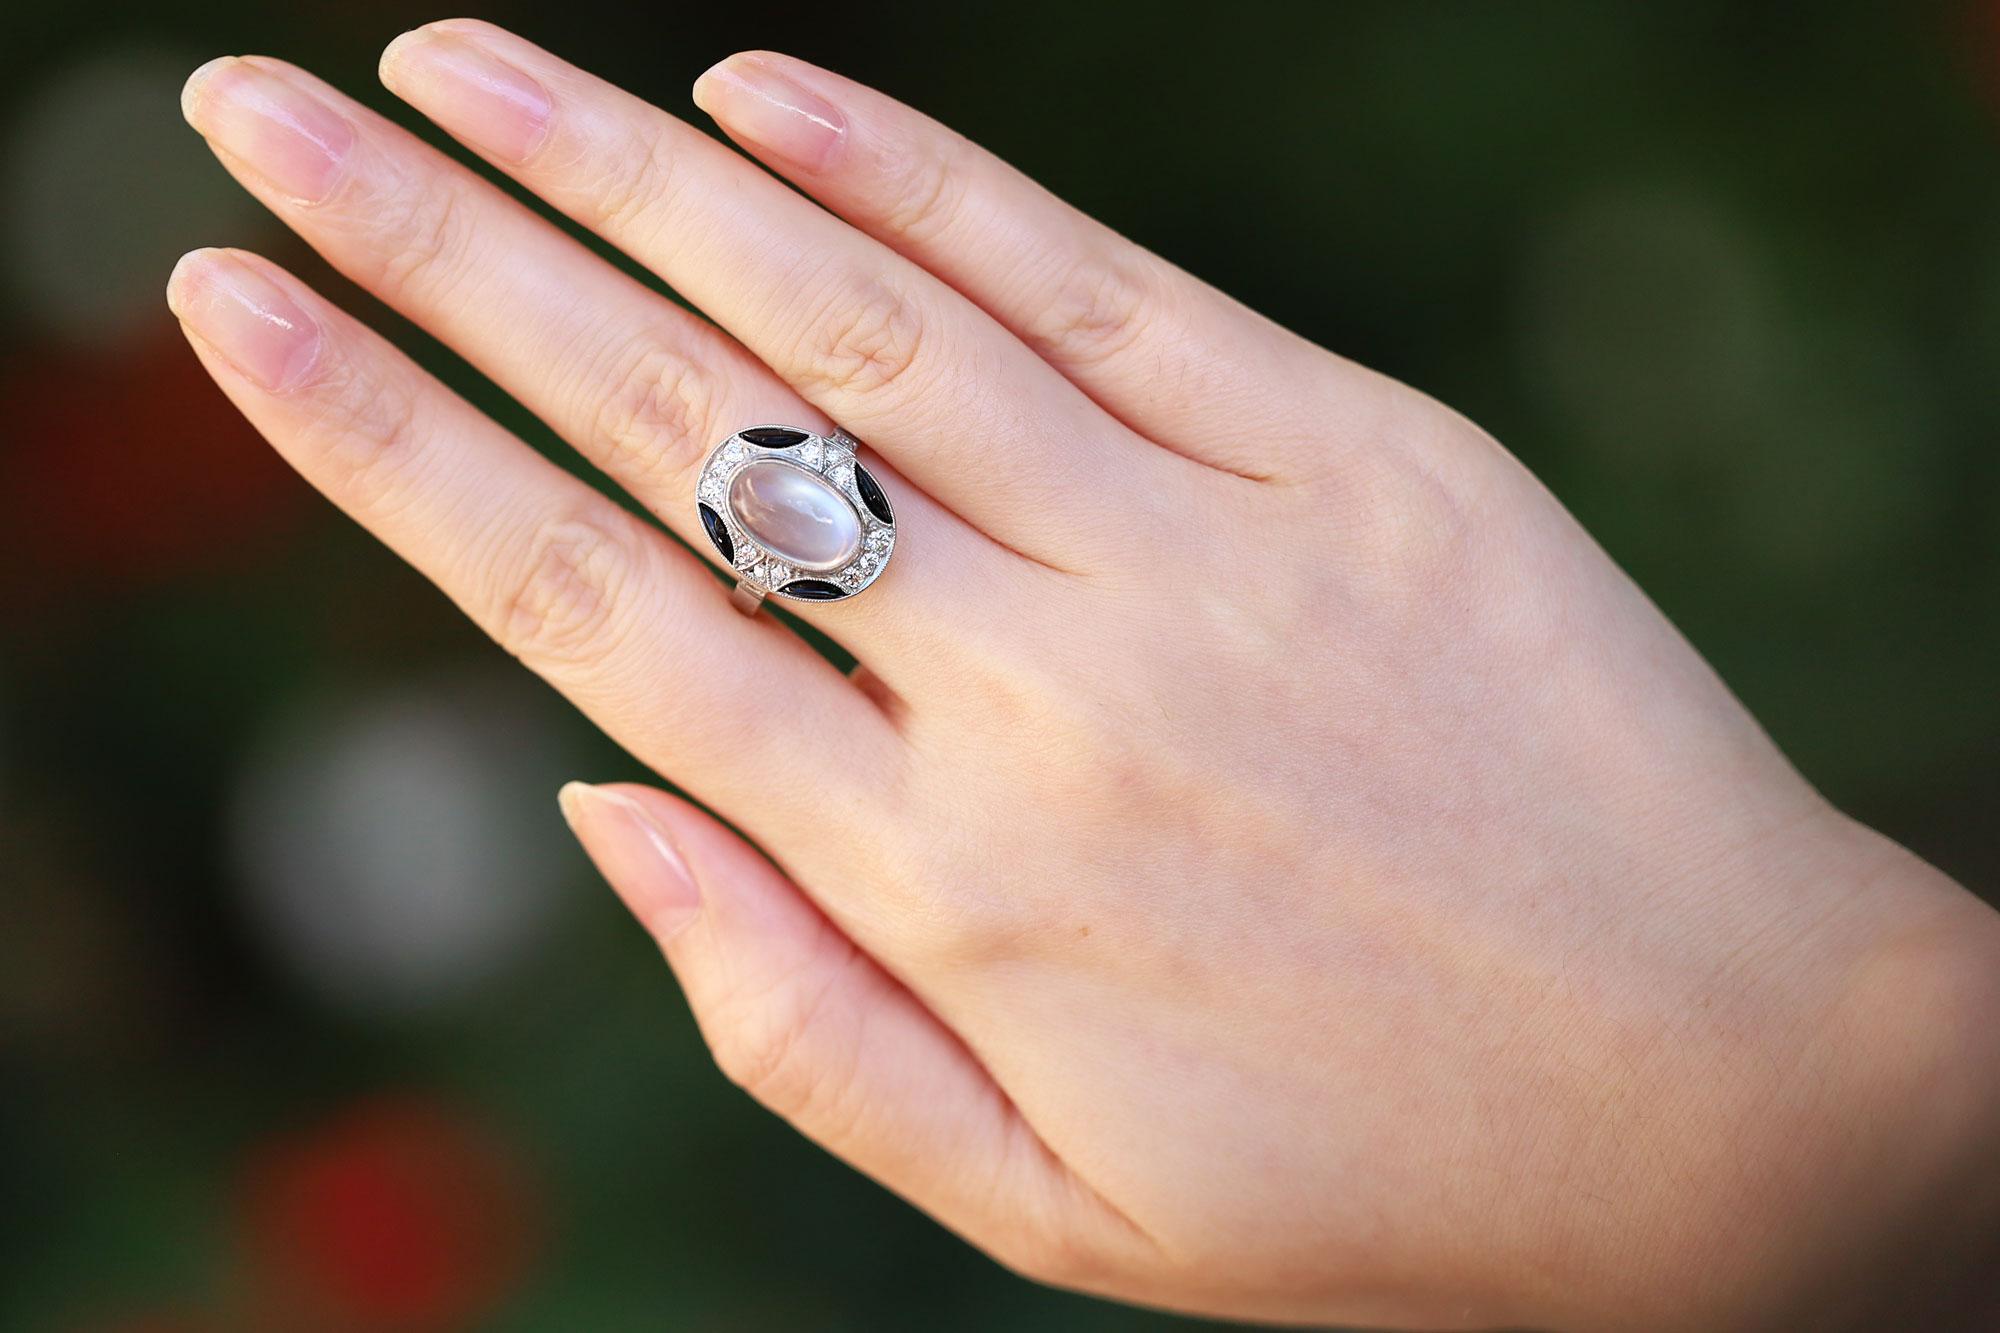 This unique vintage estate cocktail ring is crafted from platinum throughout and features a stunning 3.19 carat moonstone. The dreamy gemstone owns an ethereal, diaphanous sheen and is encircled with black onyx and 16 sparkling Old European